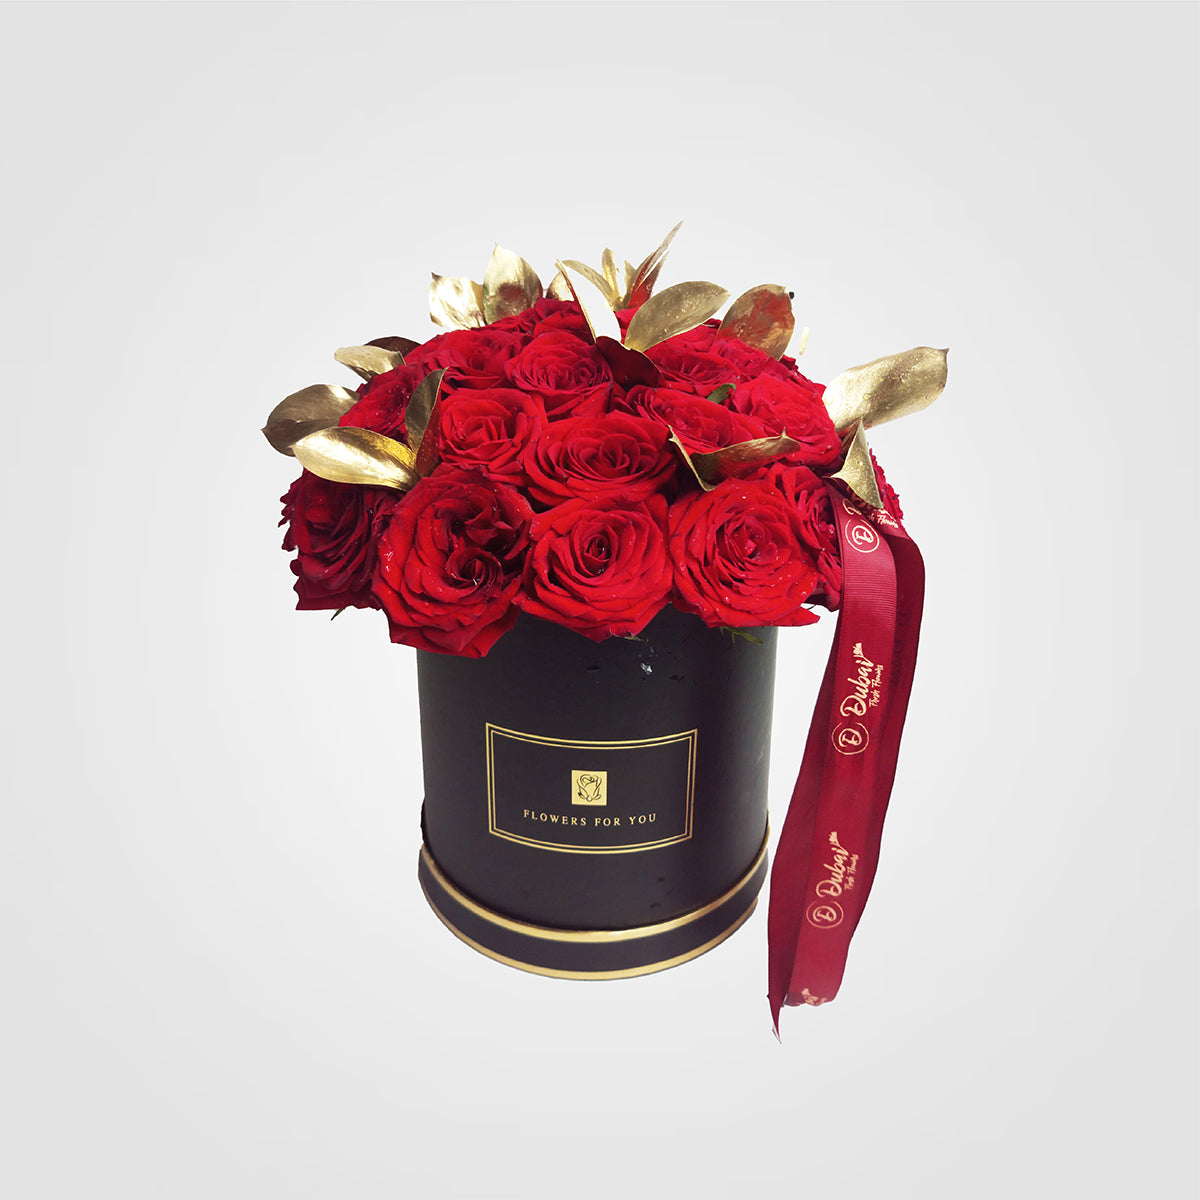 Video Box with White Roses and a Gift | Flowers Delivery in Dubai | Aiwa  Flowers